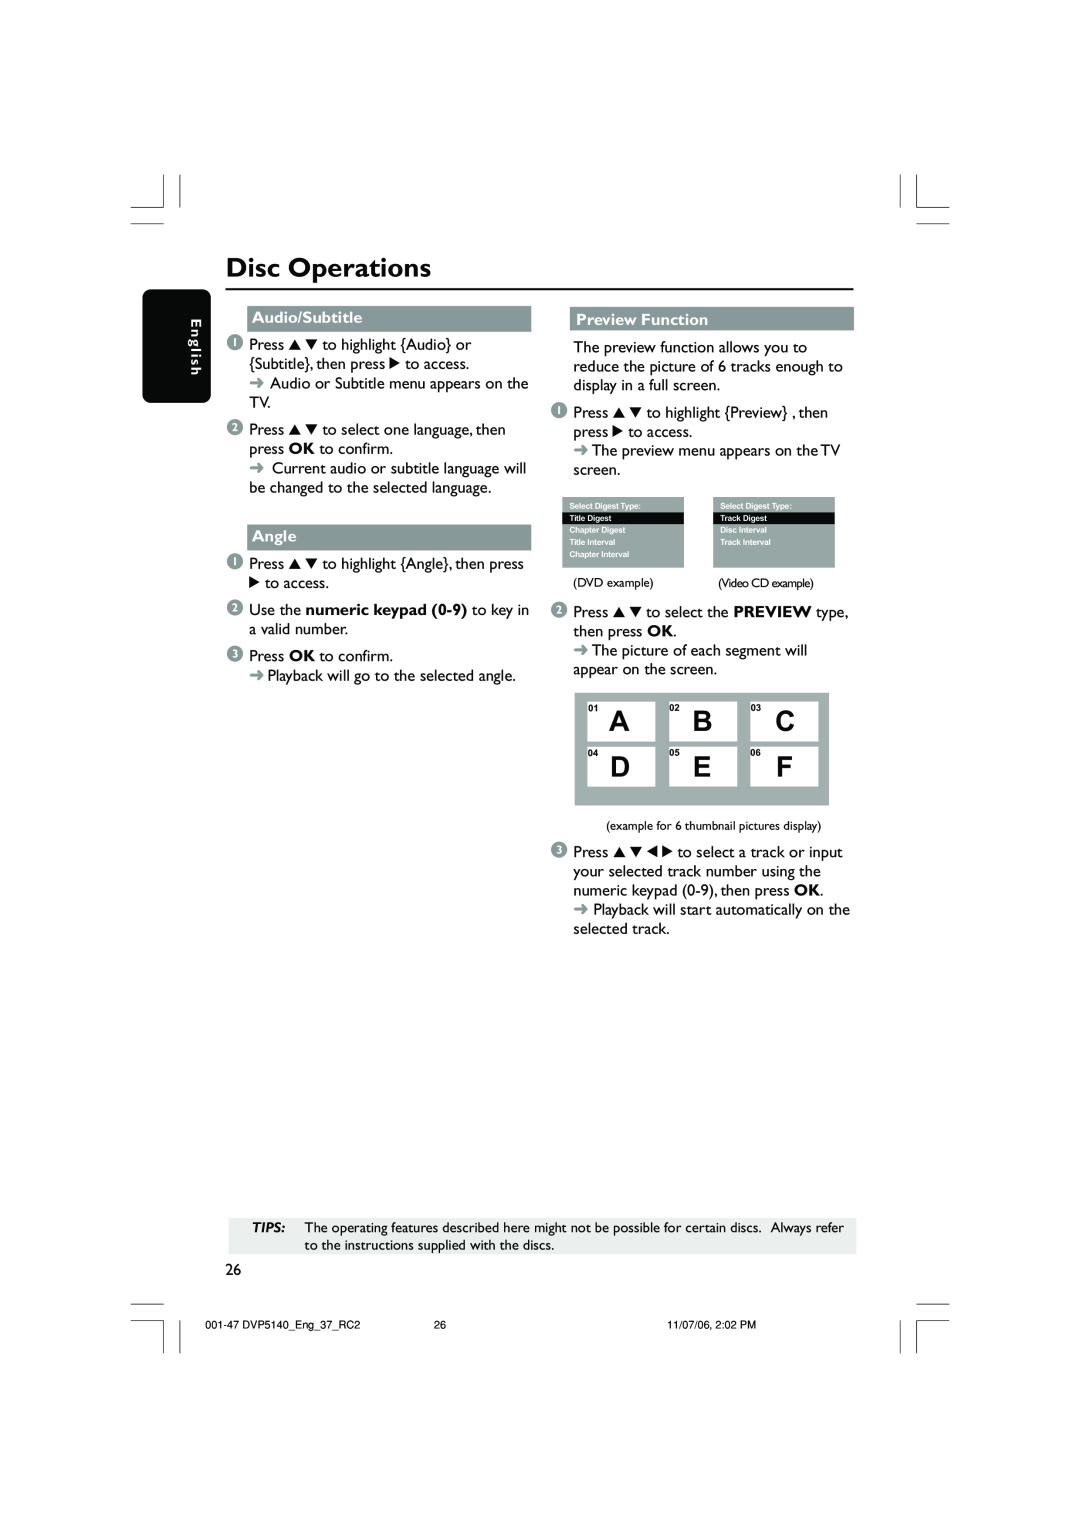 Philips DVP5140 user manual Disc Operations, Audio/Subtitle, Angle, Preview Function 